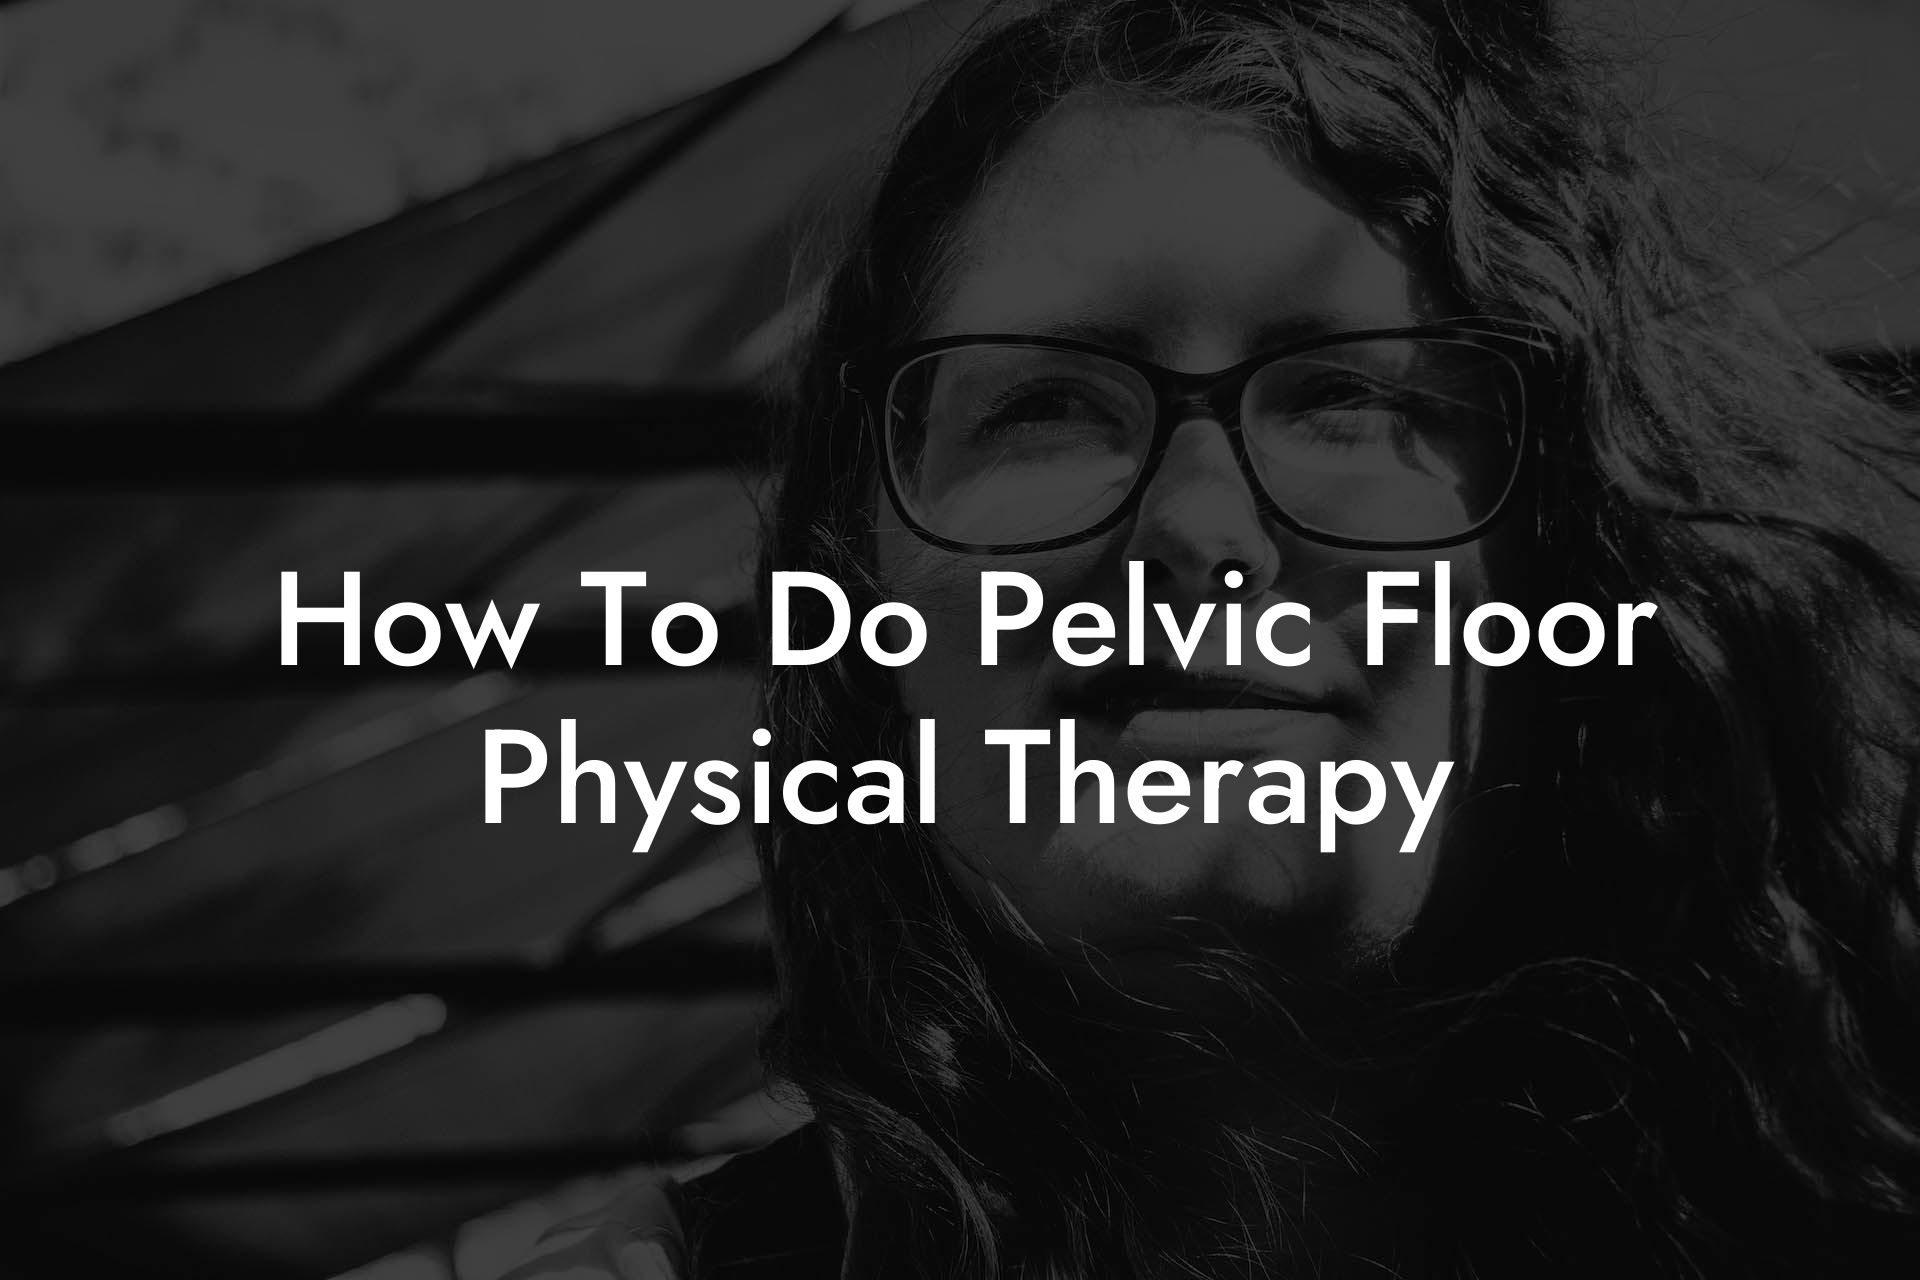 How To Do Pelvic Floor Physical Therapy